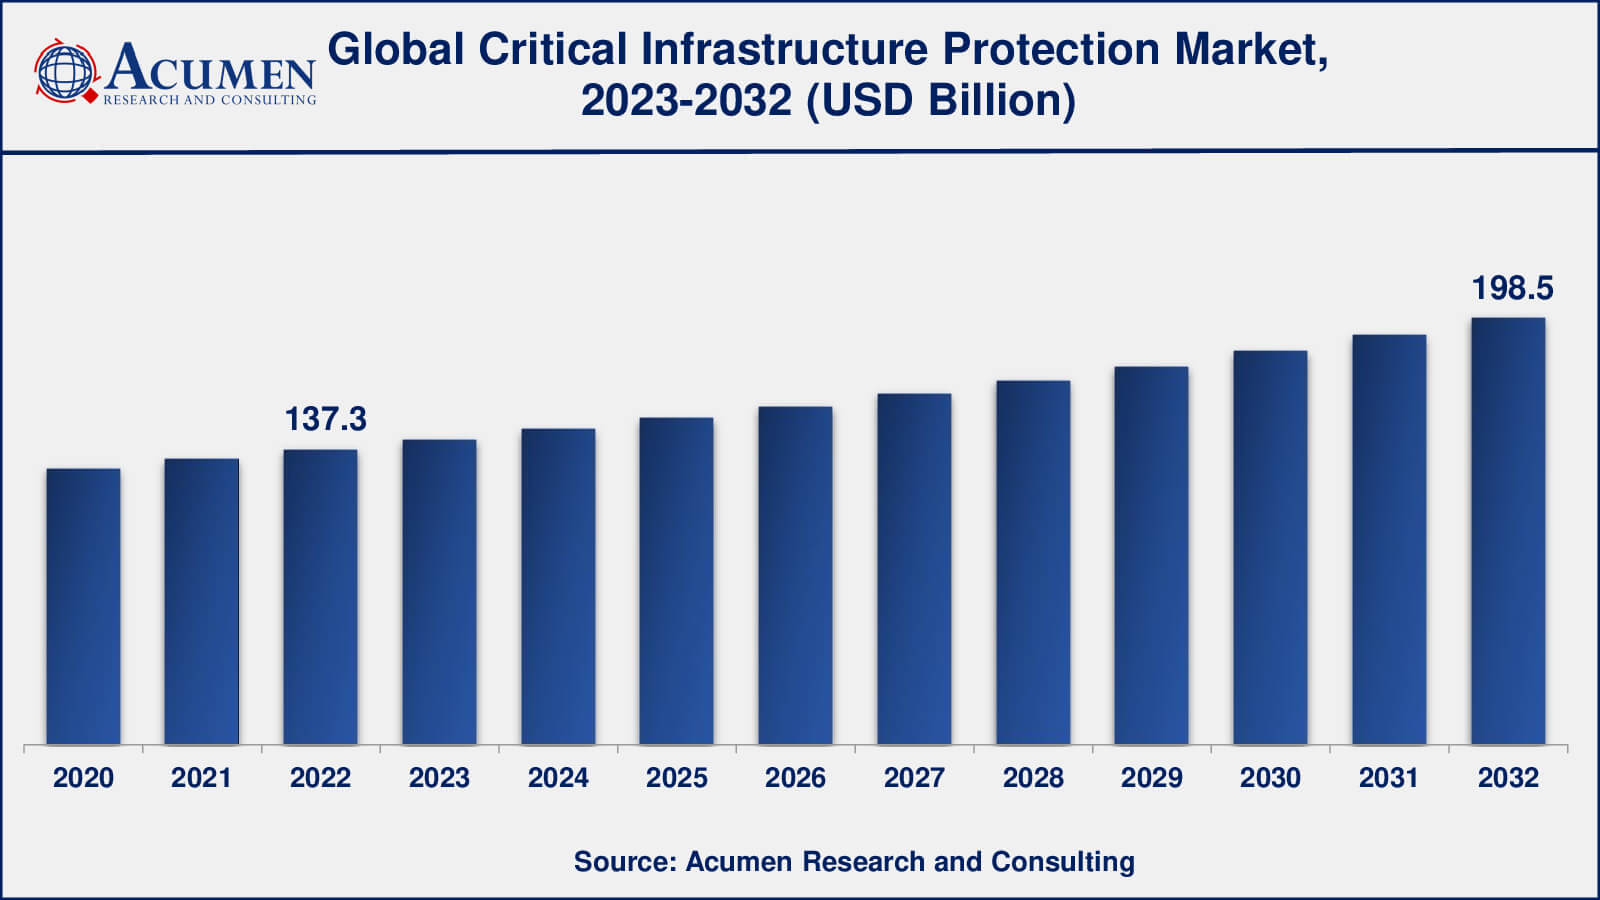 Critical Infrastructure Protection Market Analysis Period